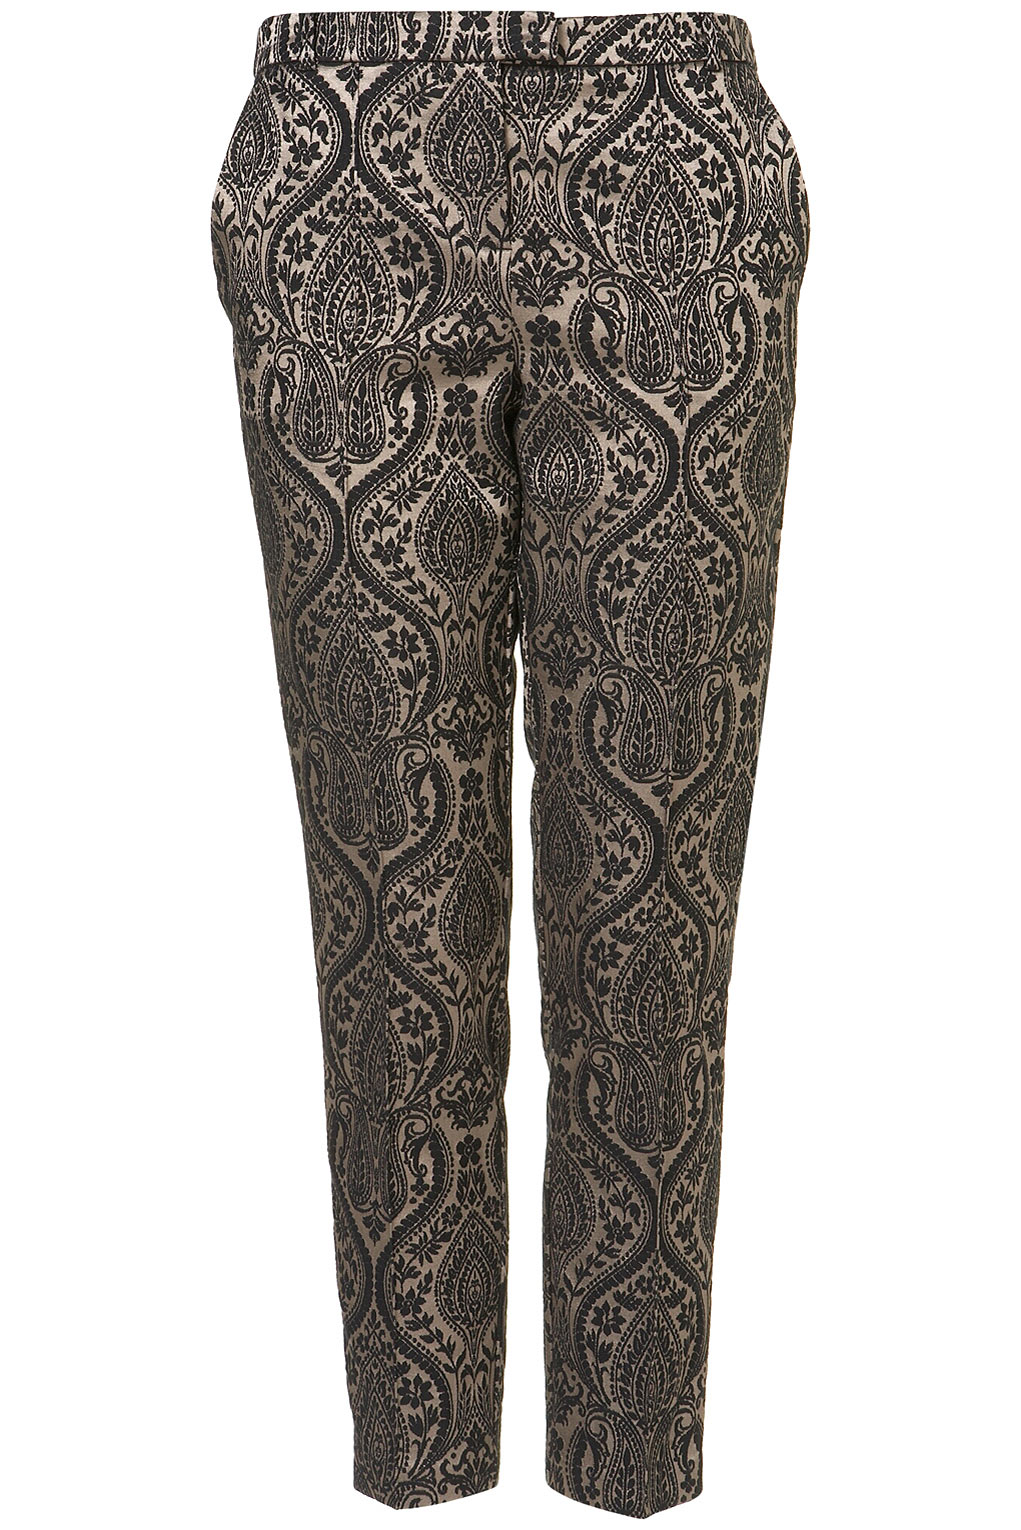 TOPSHOP Paisley Jacquard Trousers in Black - Lyst